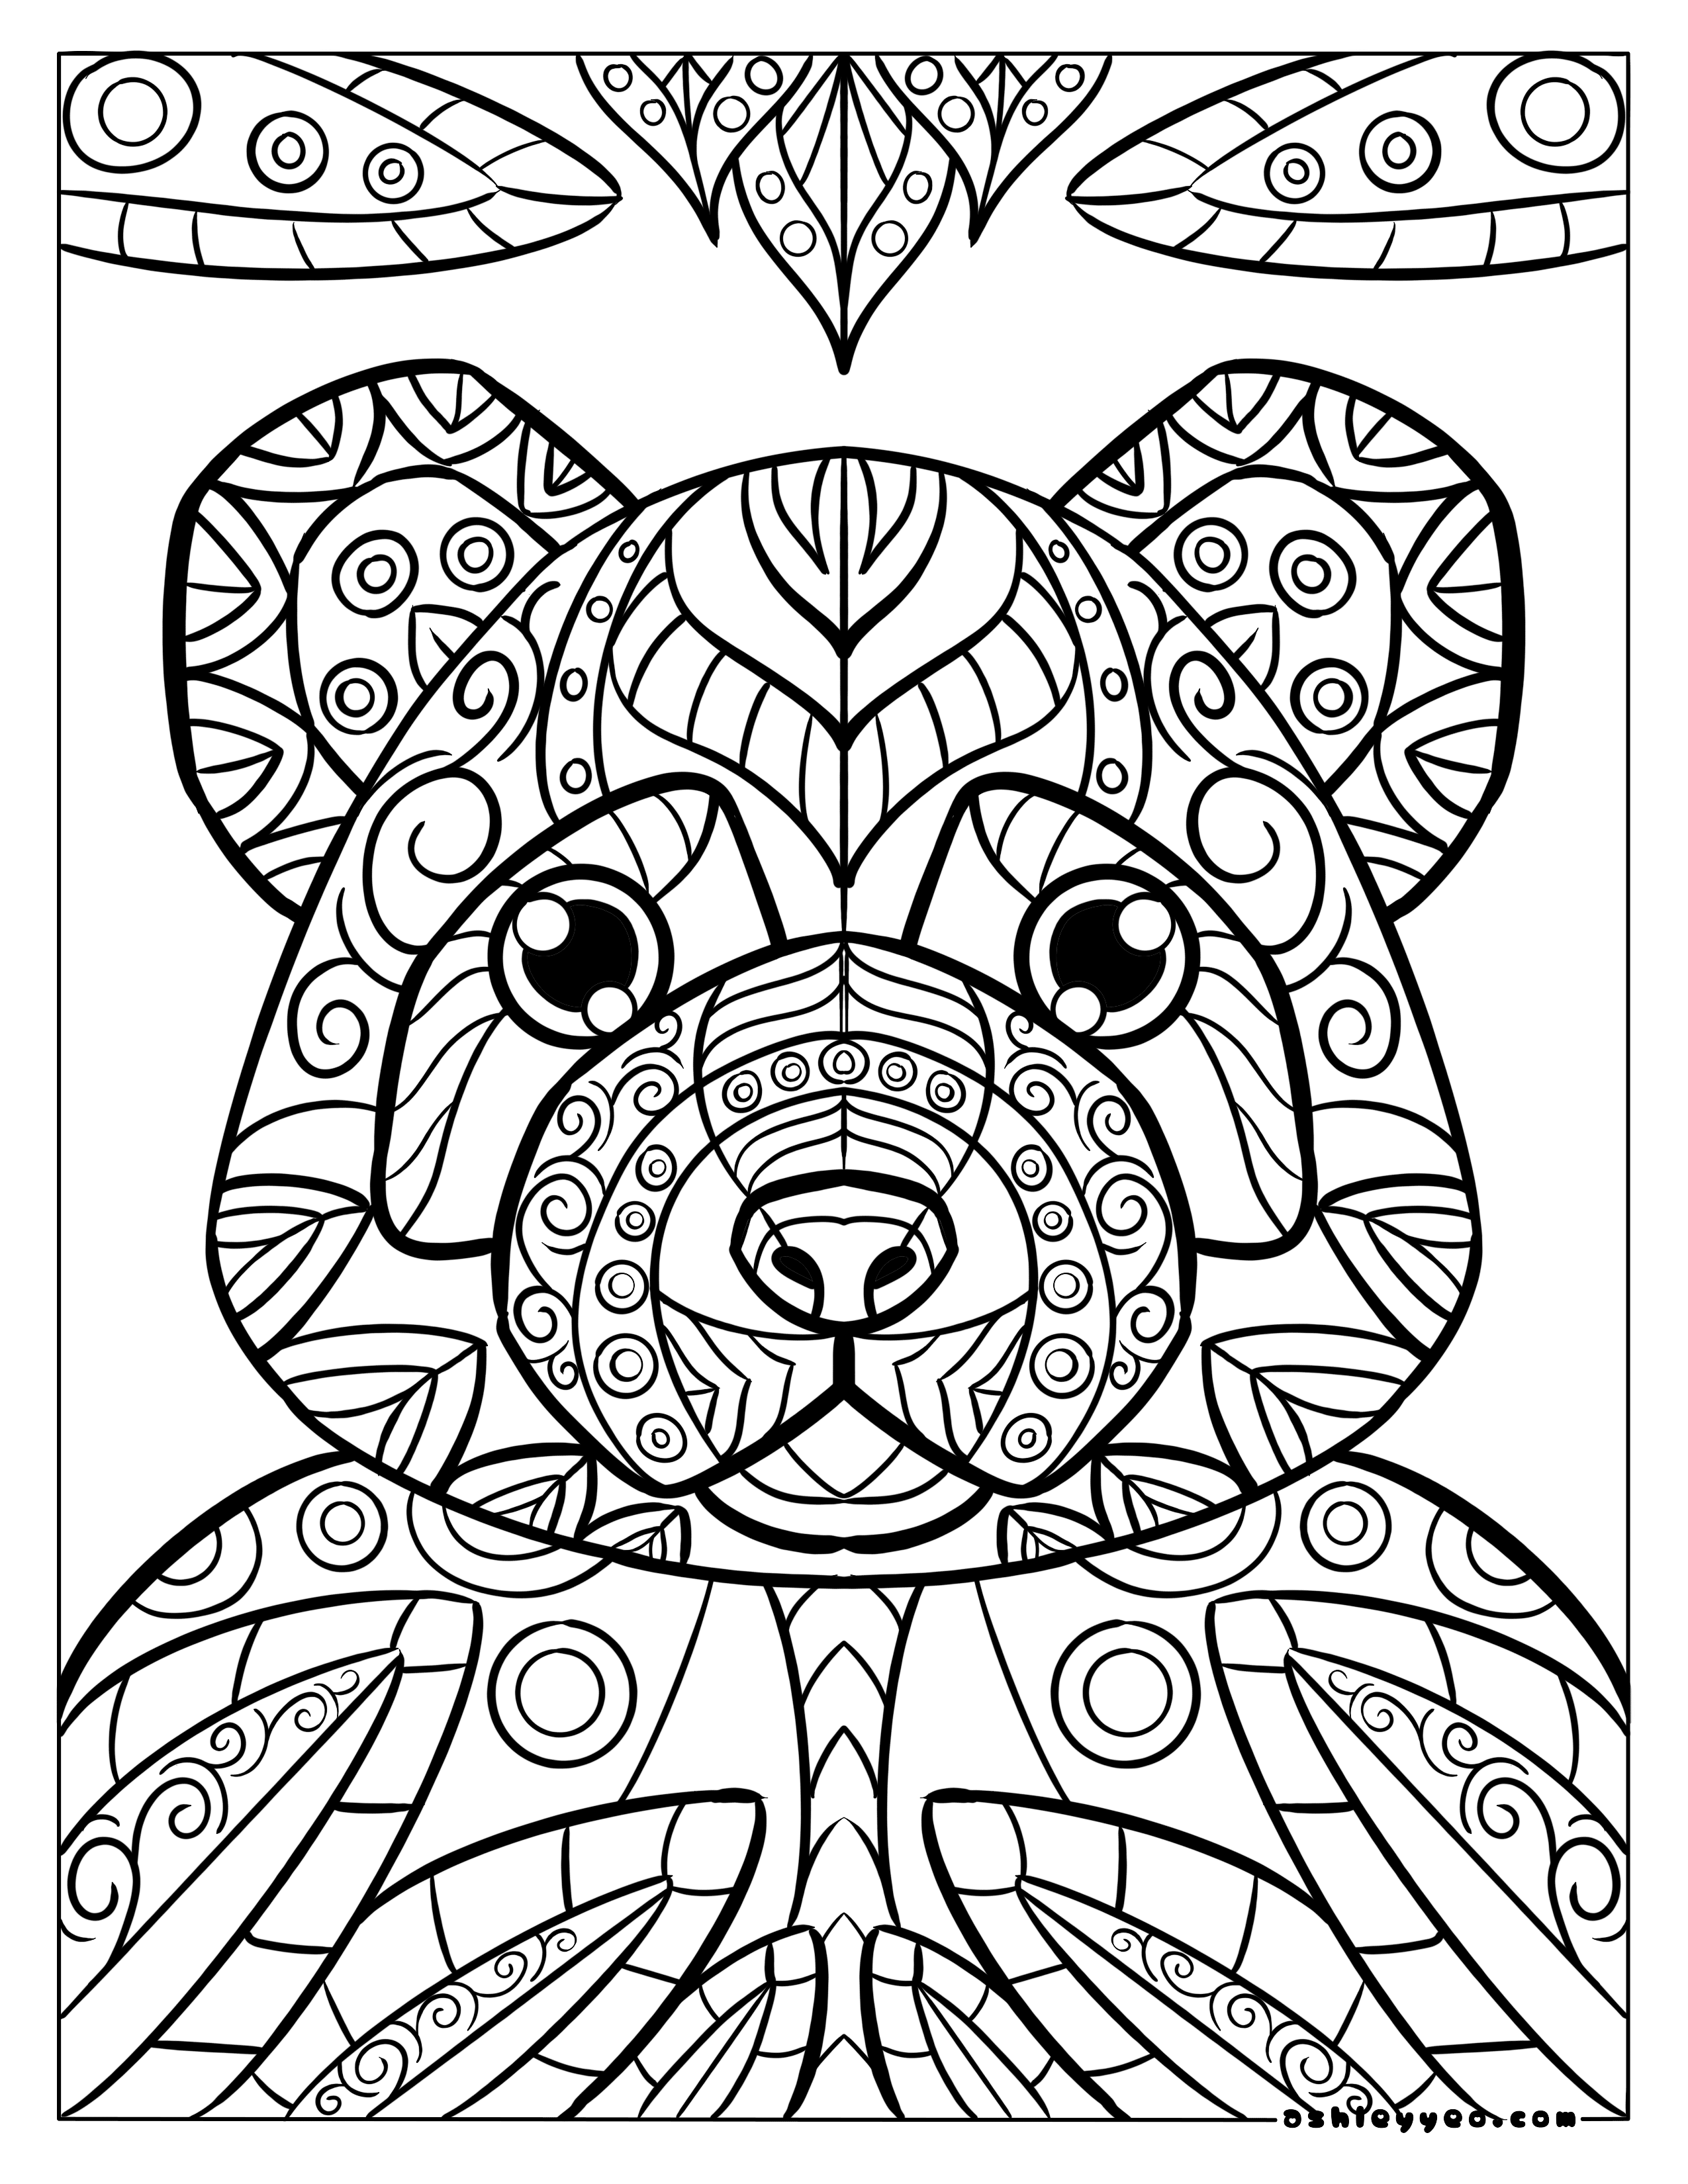 Free easy mandala animal coloring pages for kids